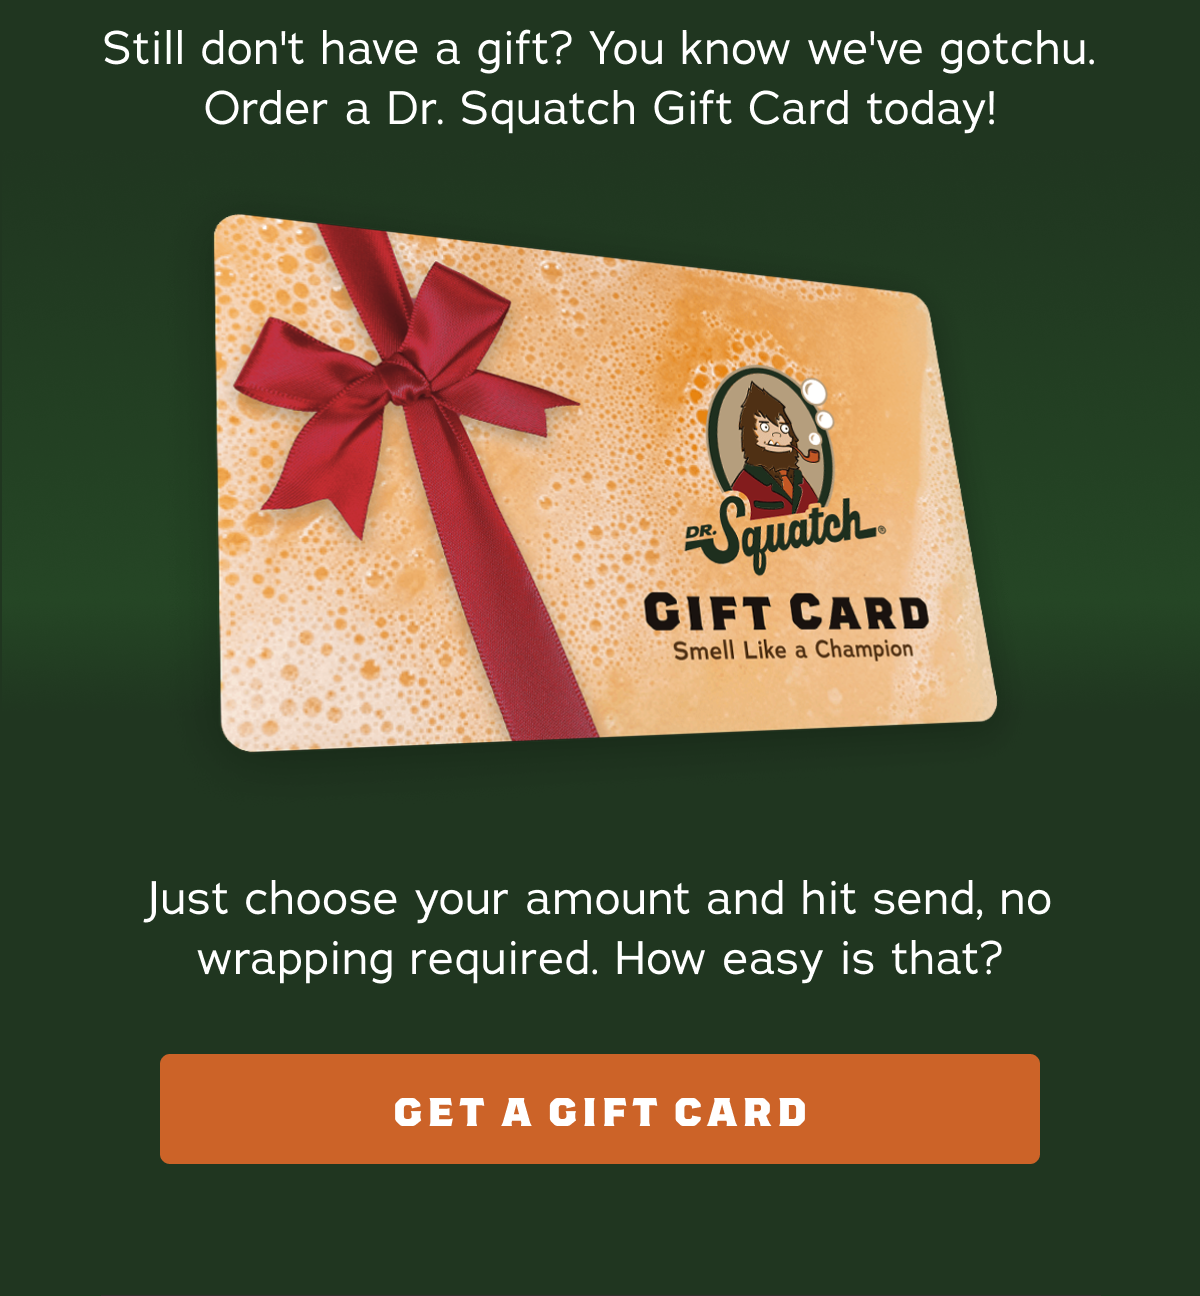 Gift Cards - Dr. Squatch